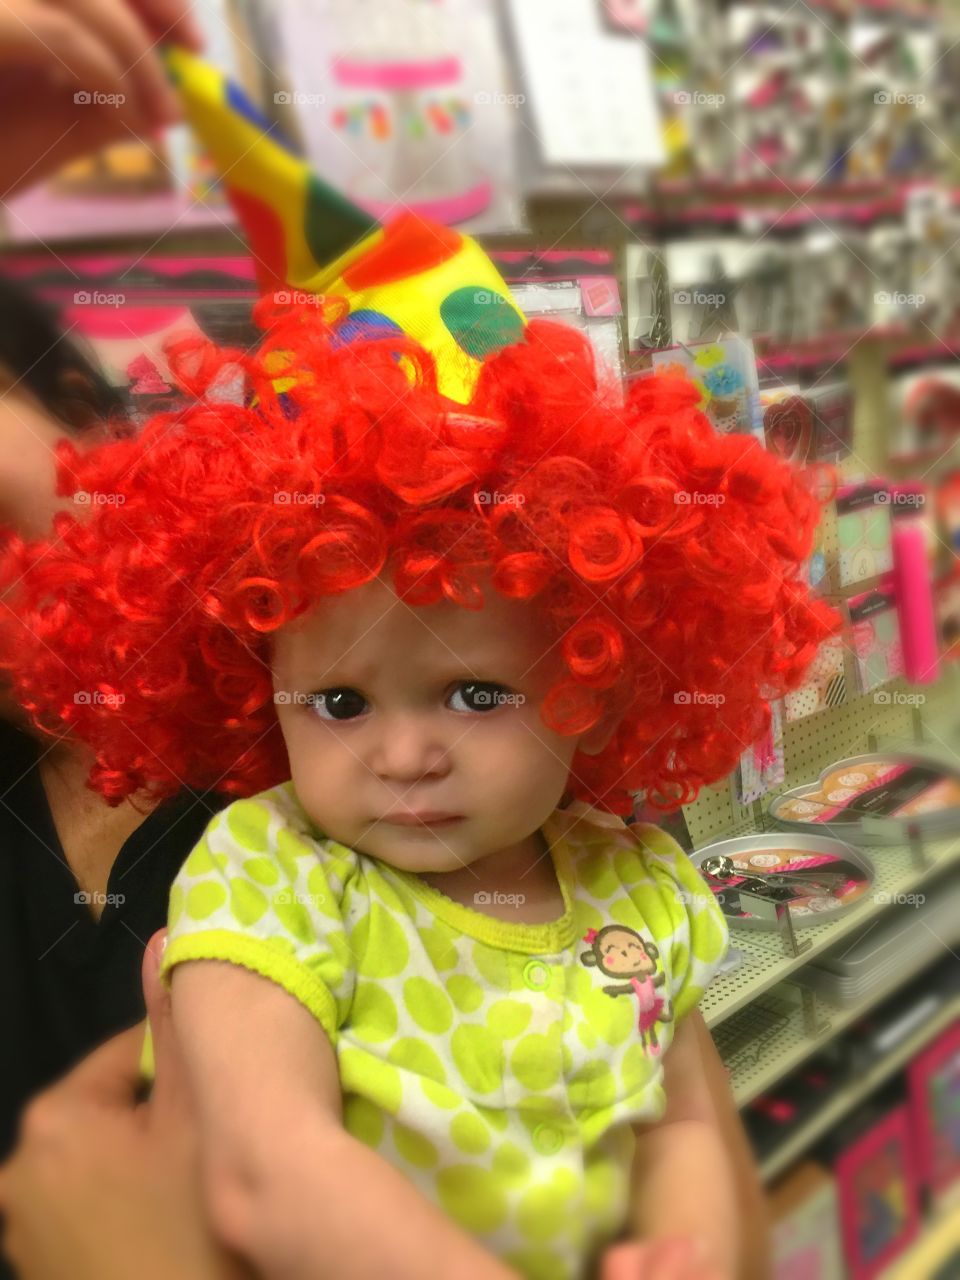 Baby Clown with Red Wig: The Red Nose Ain’t Happenin’